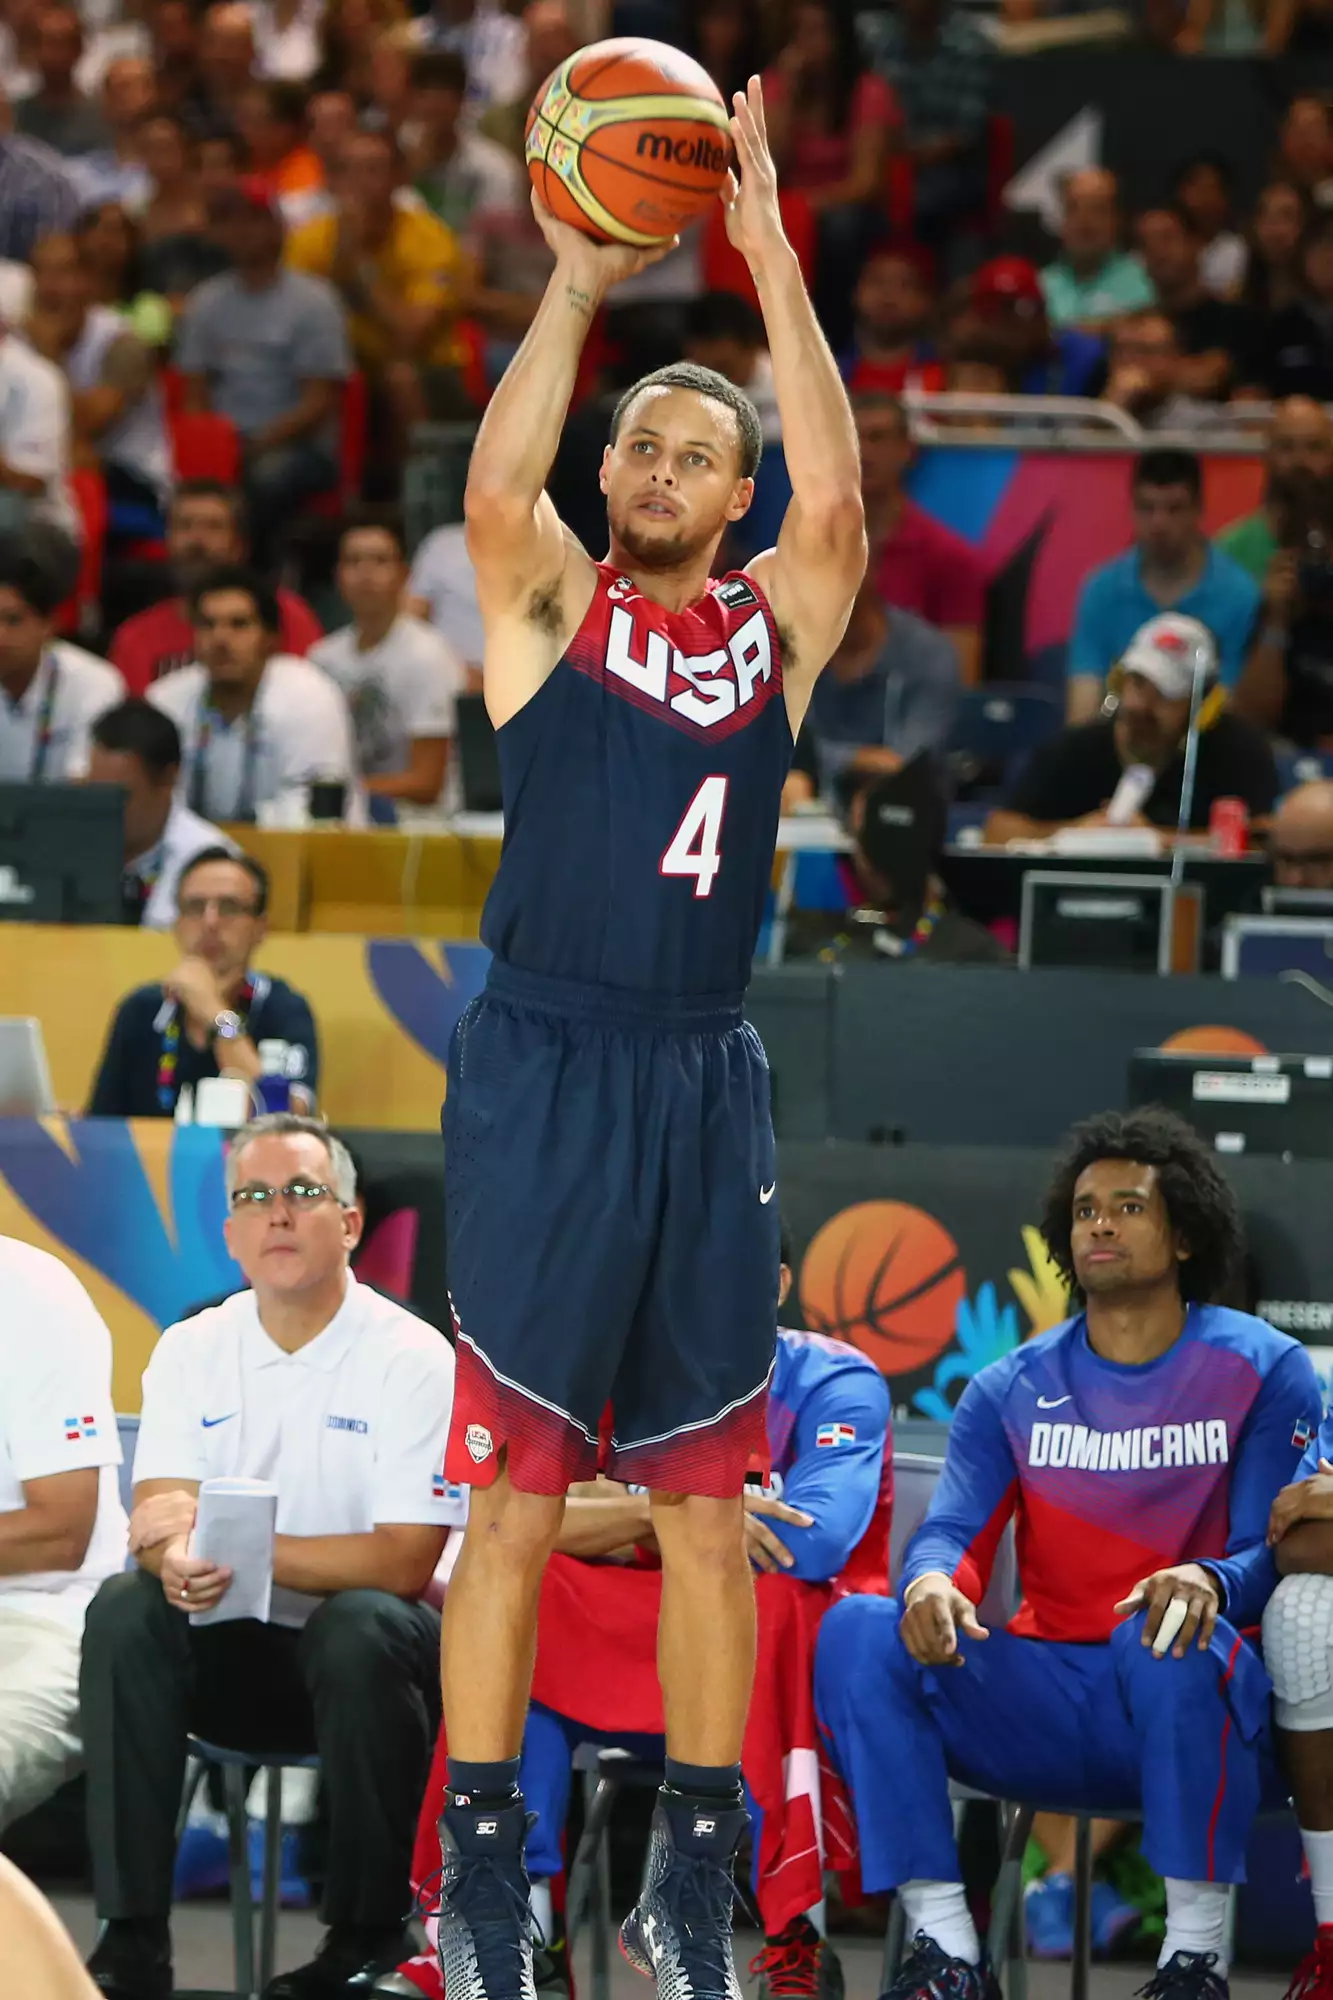 Stephen Curry #4 of the USA Basketball Men's National Team shoots during a game against the Dominican Republic Basketball Men's National Team during the 2014 FIBA World Cu